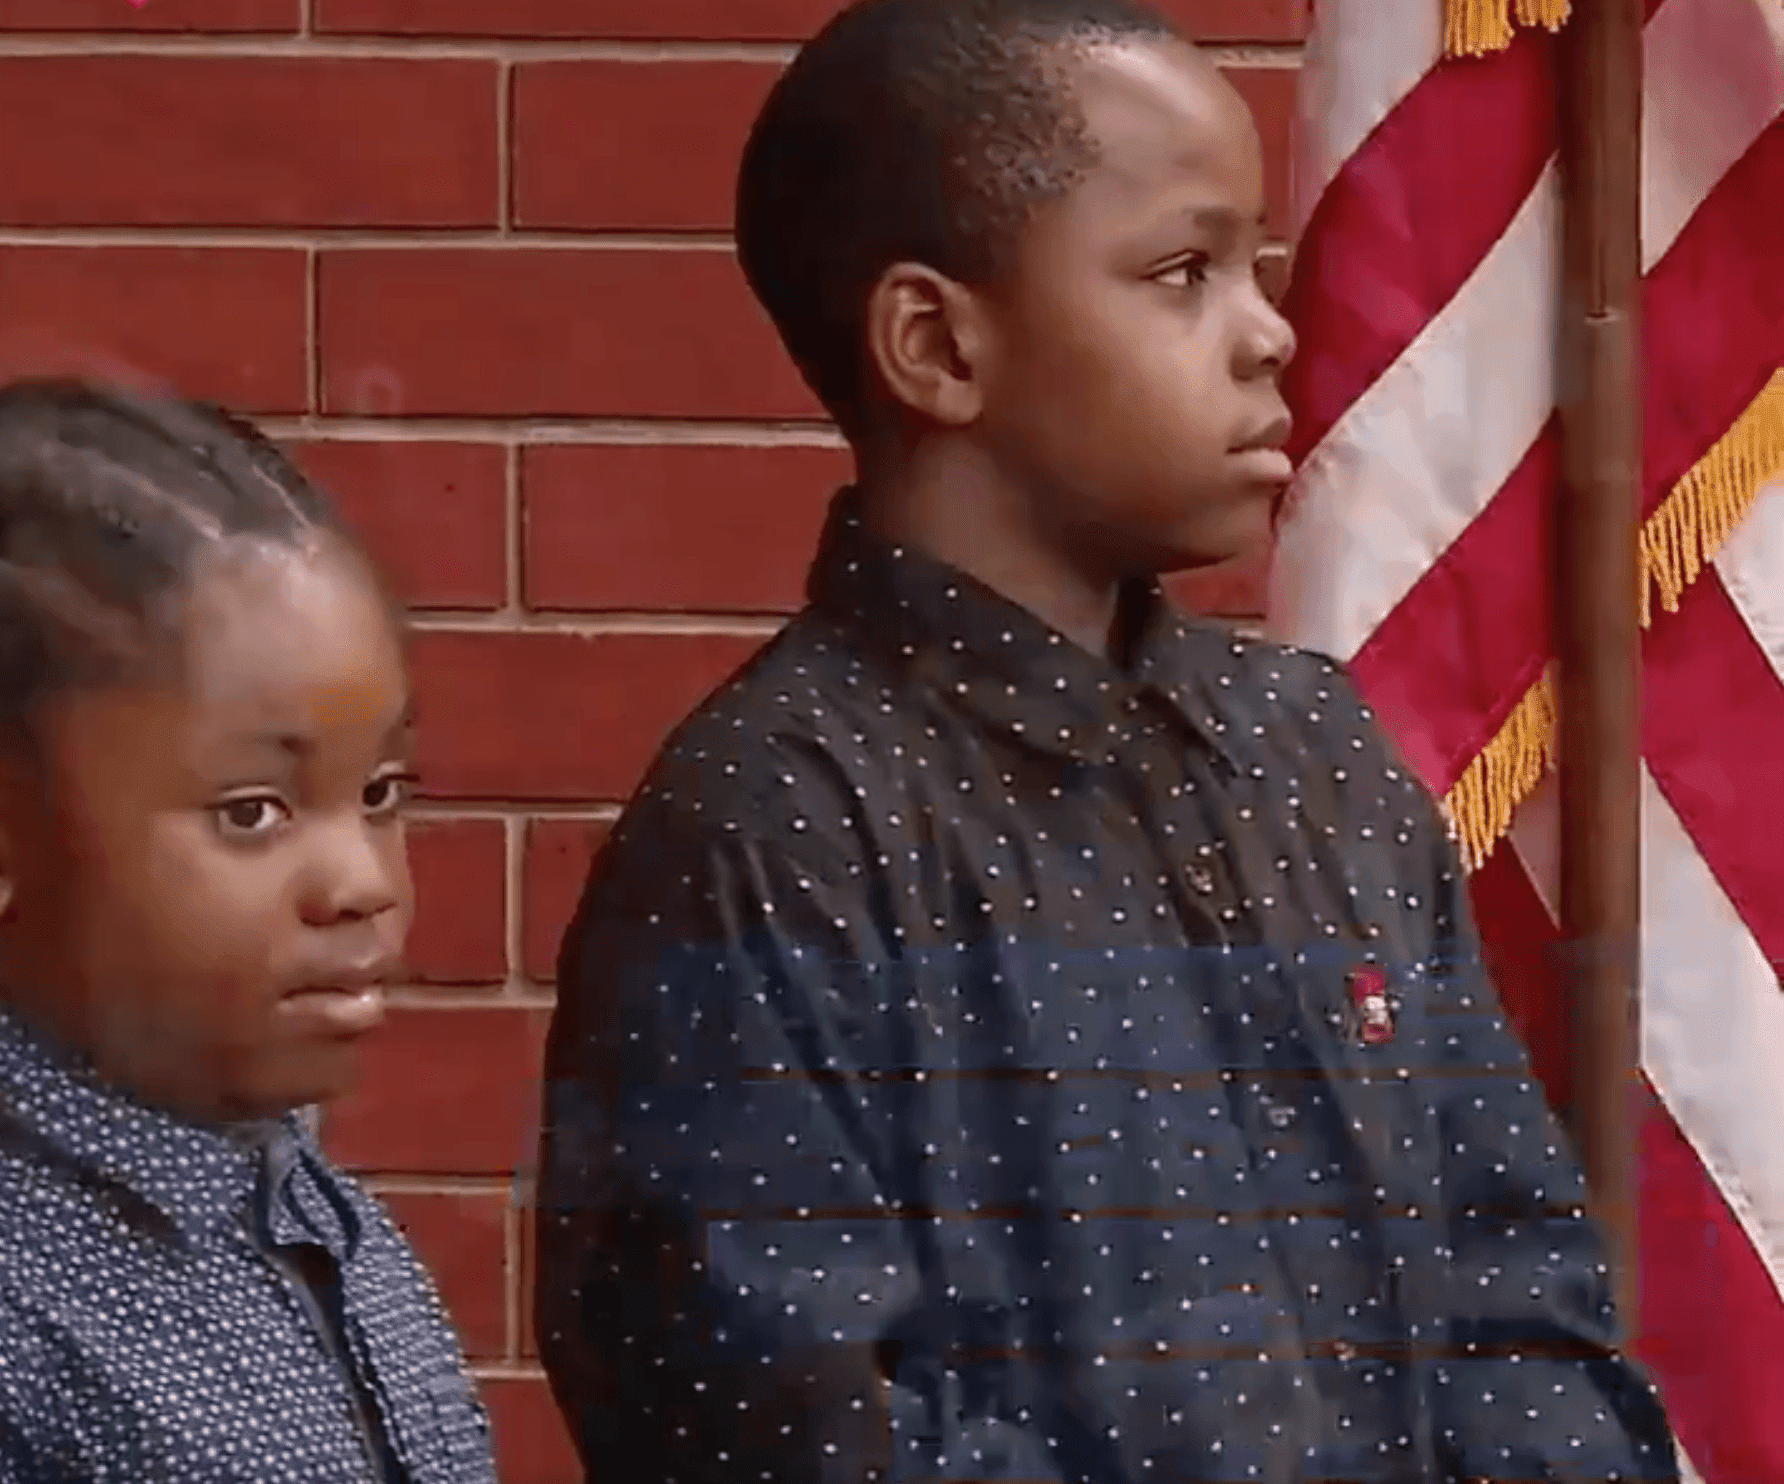 The boys, Derrick and Thomas, who stopped to declare the Pledge of Allegiance | Photo: Twitter/CBS News